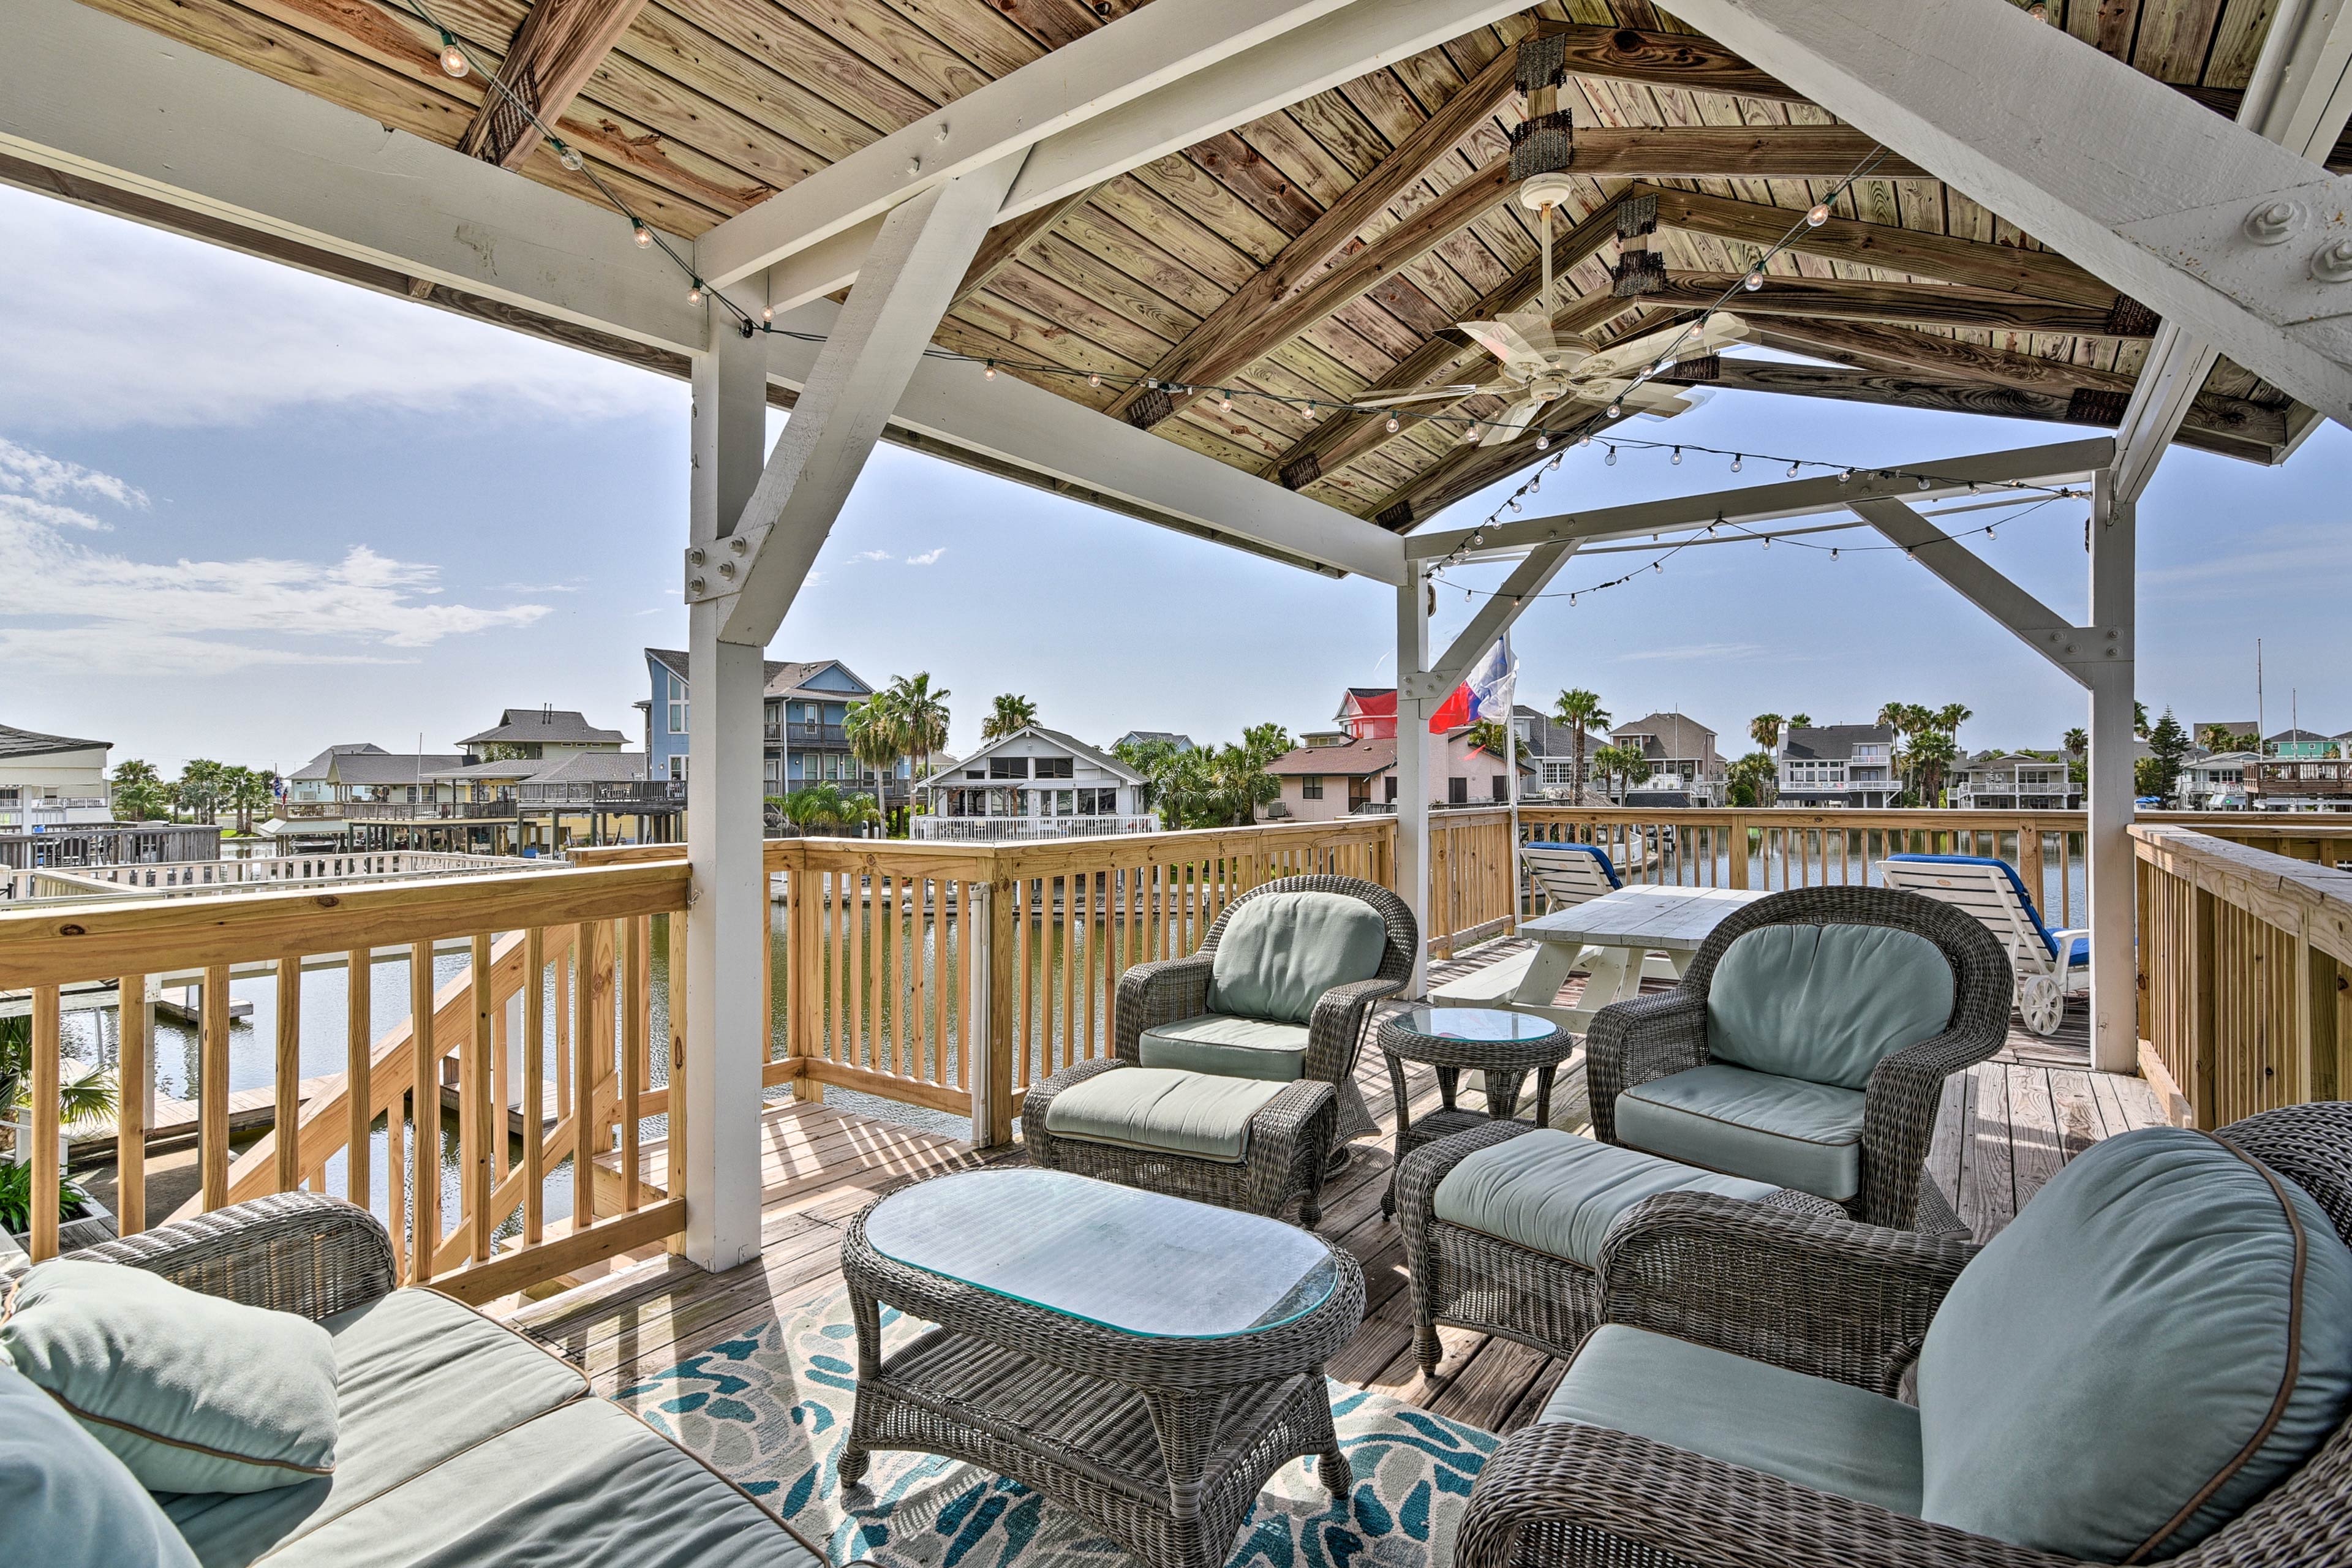 Spend time reconnecting with loved ones on the spacious deck.